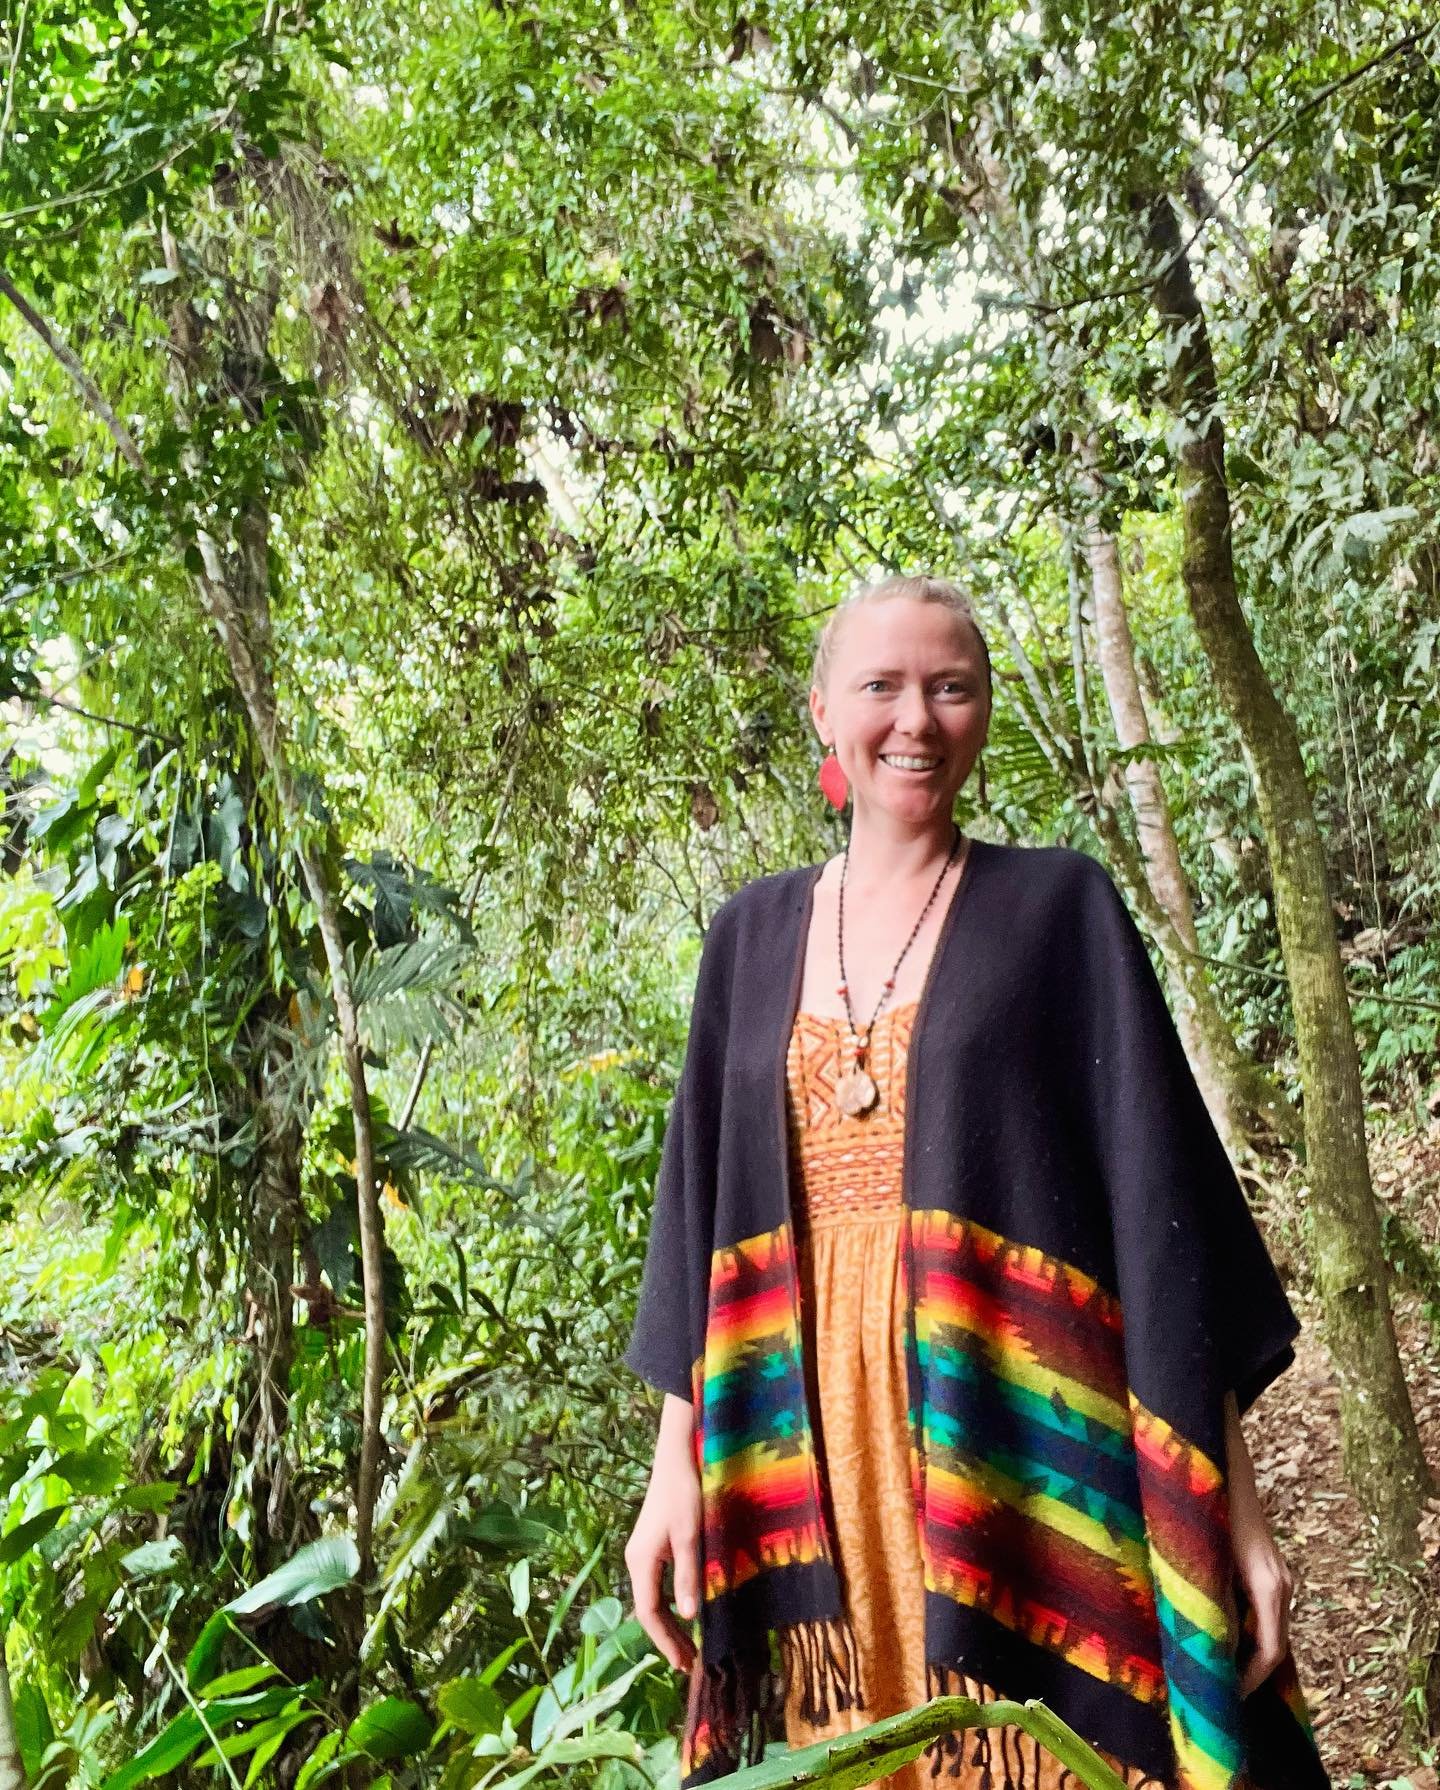 Confirmation Comes in Threes 

I prayed a lot as I walked toward Costa Rica. &ldquo;Am I losing my mind?&rdquo; Am I really going to sell my car and give away most of my belongings? For what? &rdquo; The answer was consistent and subtle. The things y